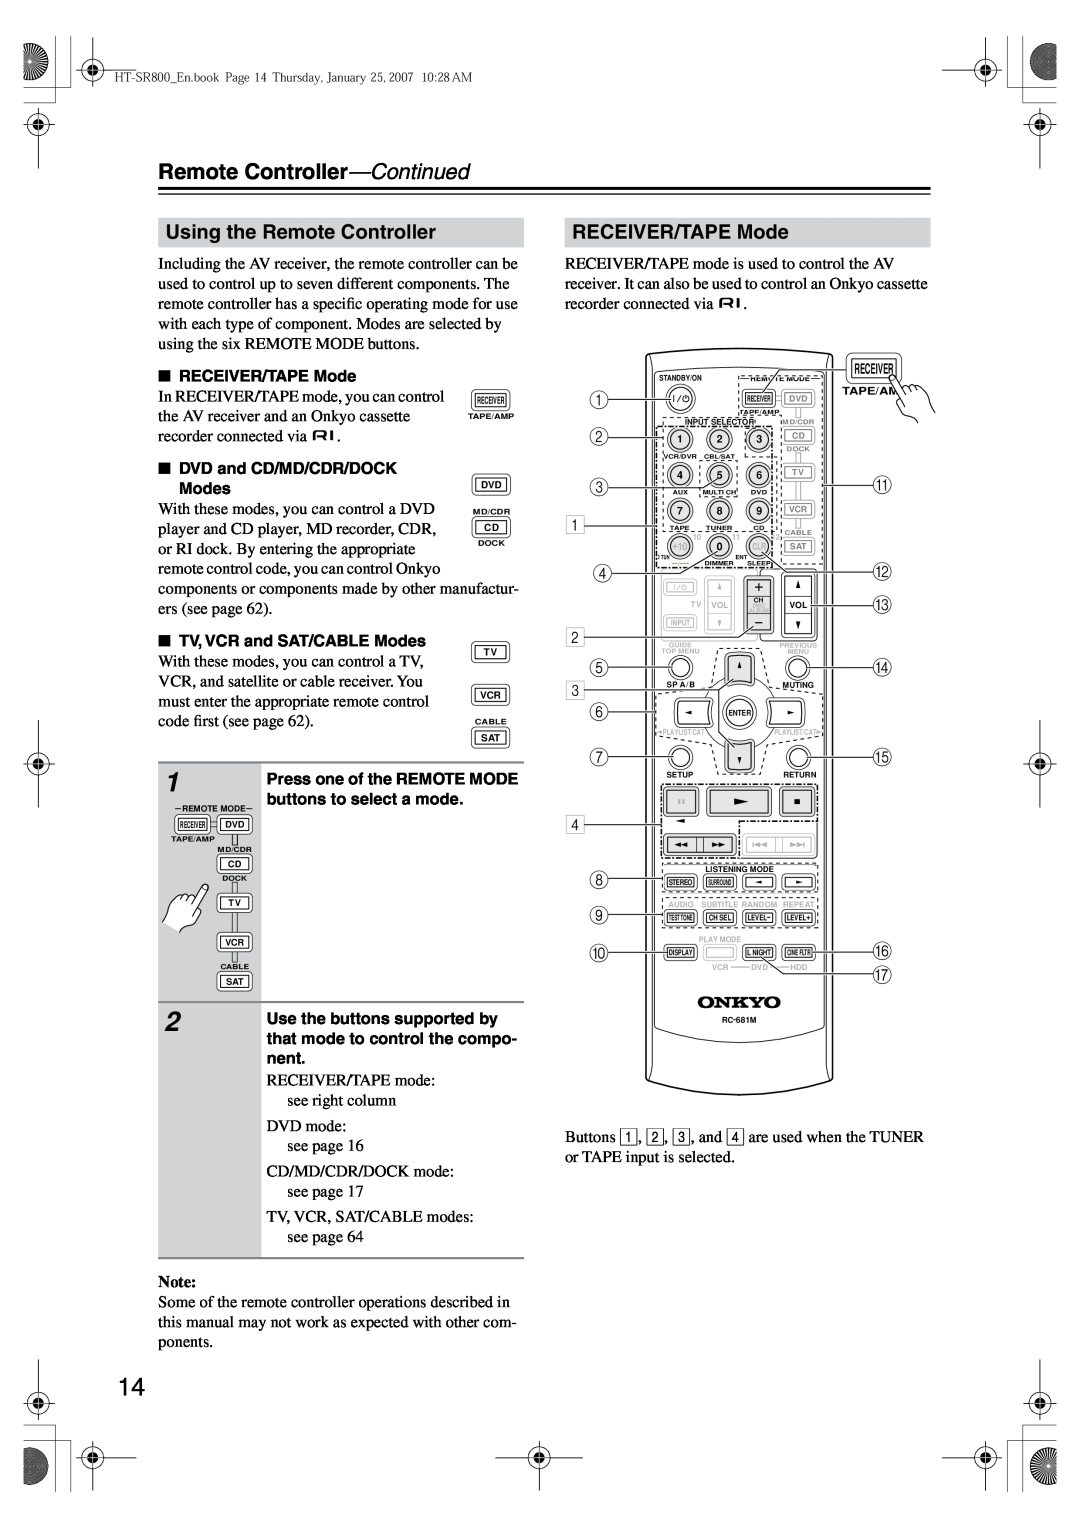 Onkyo HT-SR800 instruction manual Remote Controller-Continued, Using the Remote Controller, RECEIVER/TAPE Mode 